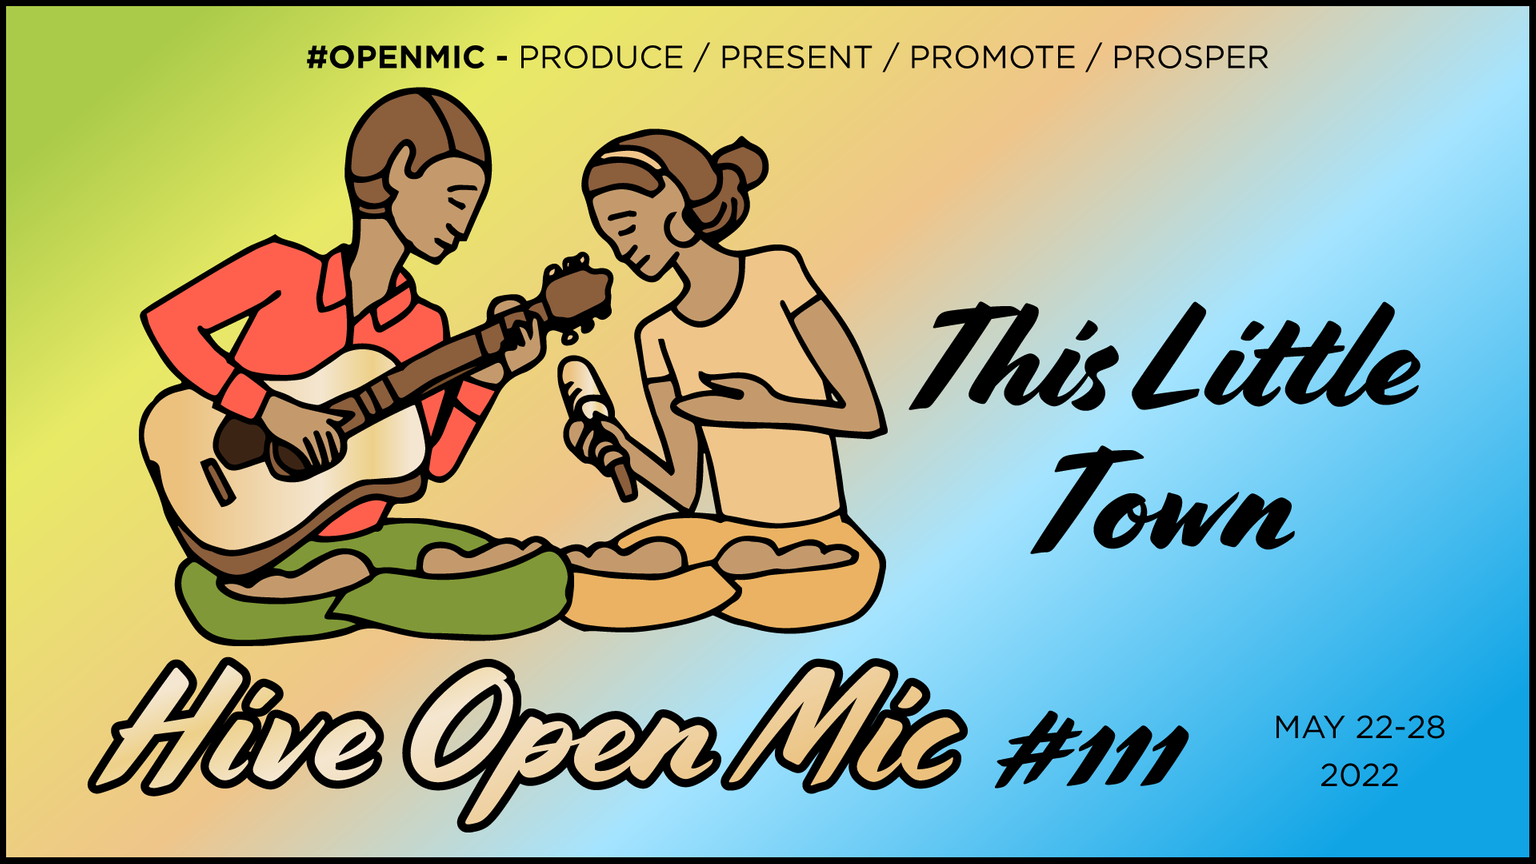 Hive open mic week 111|| This Little Town @nickzy [ENG/ES] — Hive